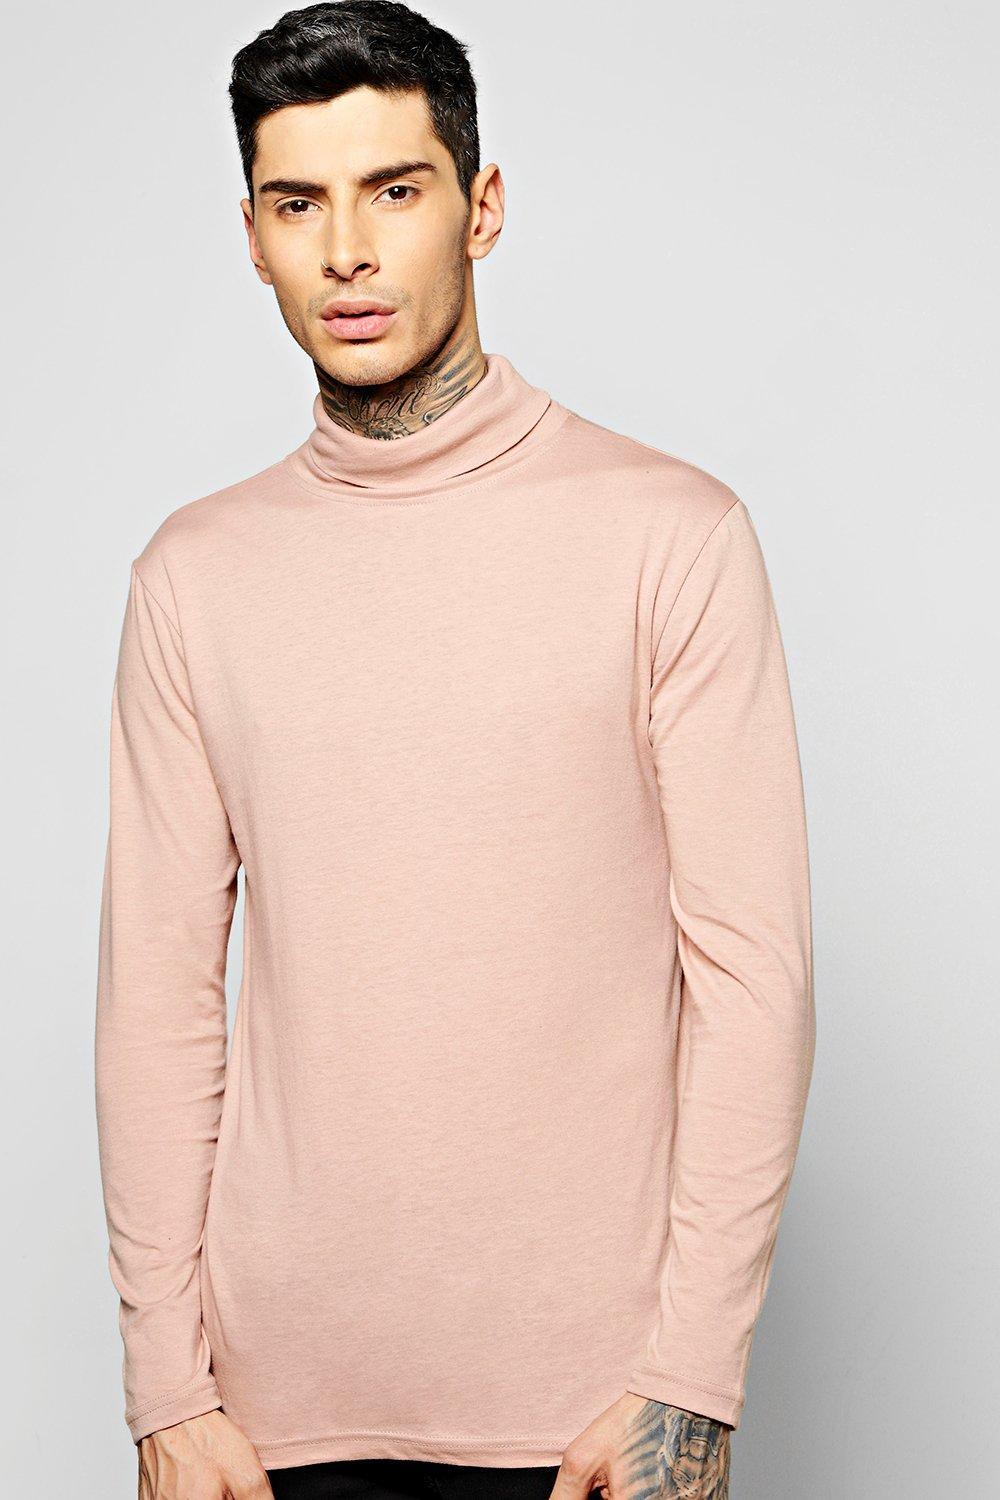 Lyst - Boohoo Long Sleeve Jersey Roll Neck Top in Pink for Men